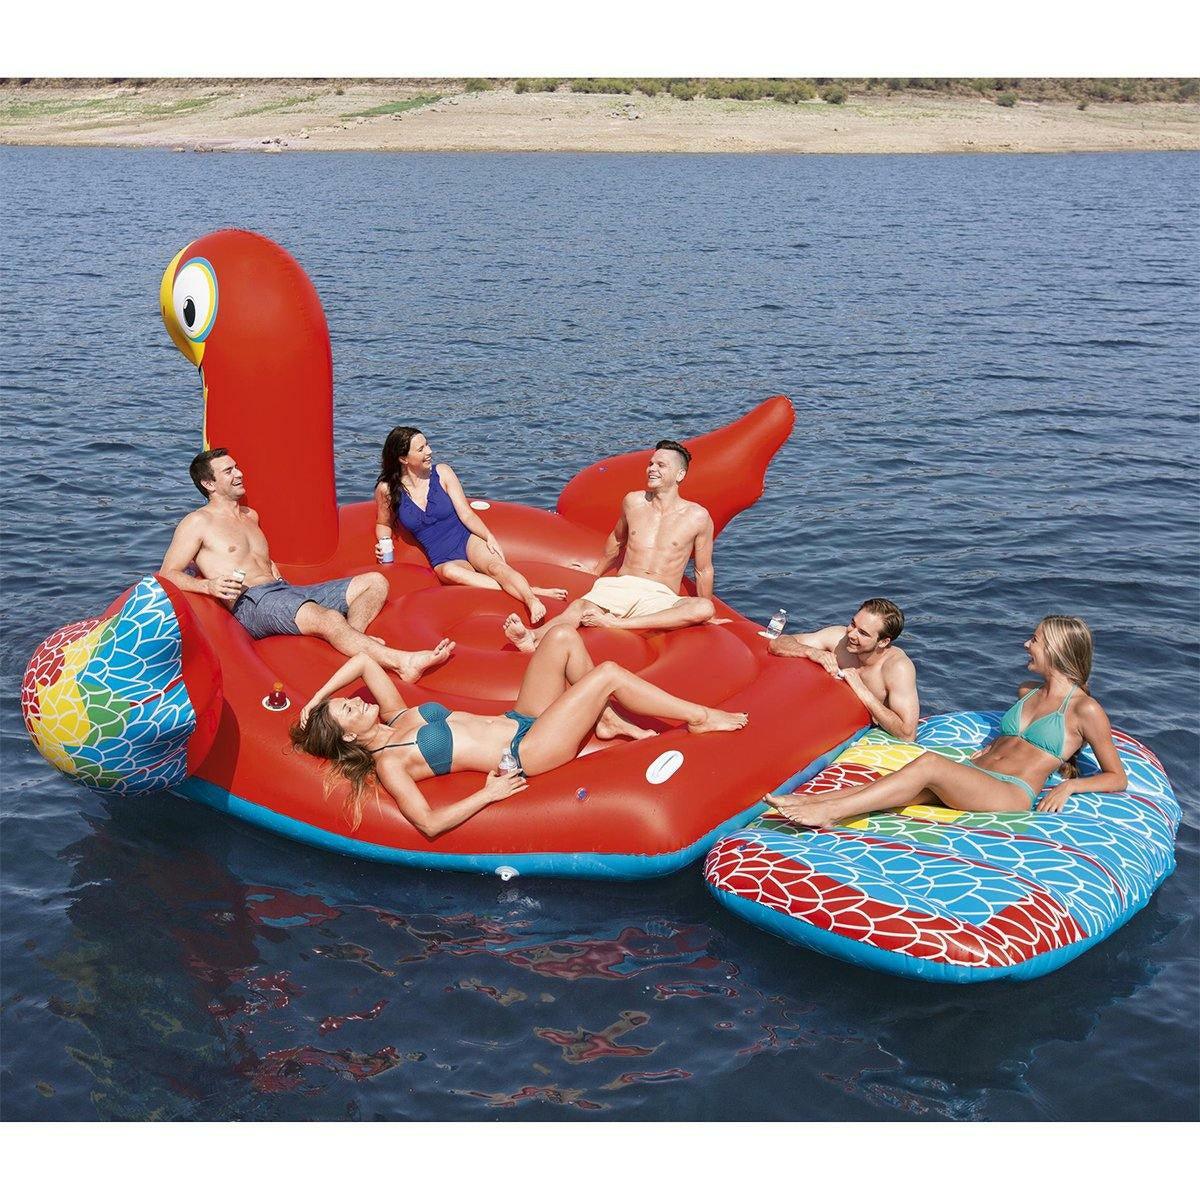 Bestway Inflatable Parrot Shaped Ride-On Float - BumbleToys - 18+, Boys, Eagle Plus, flamingo, Floaters, Girls, Inflatables, Pre-Order, Sand Toys Pools & Inflatables, unicorn